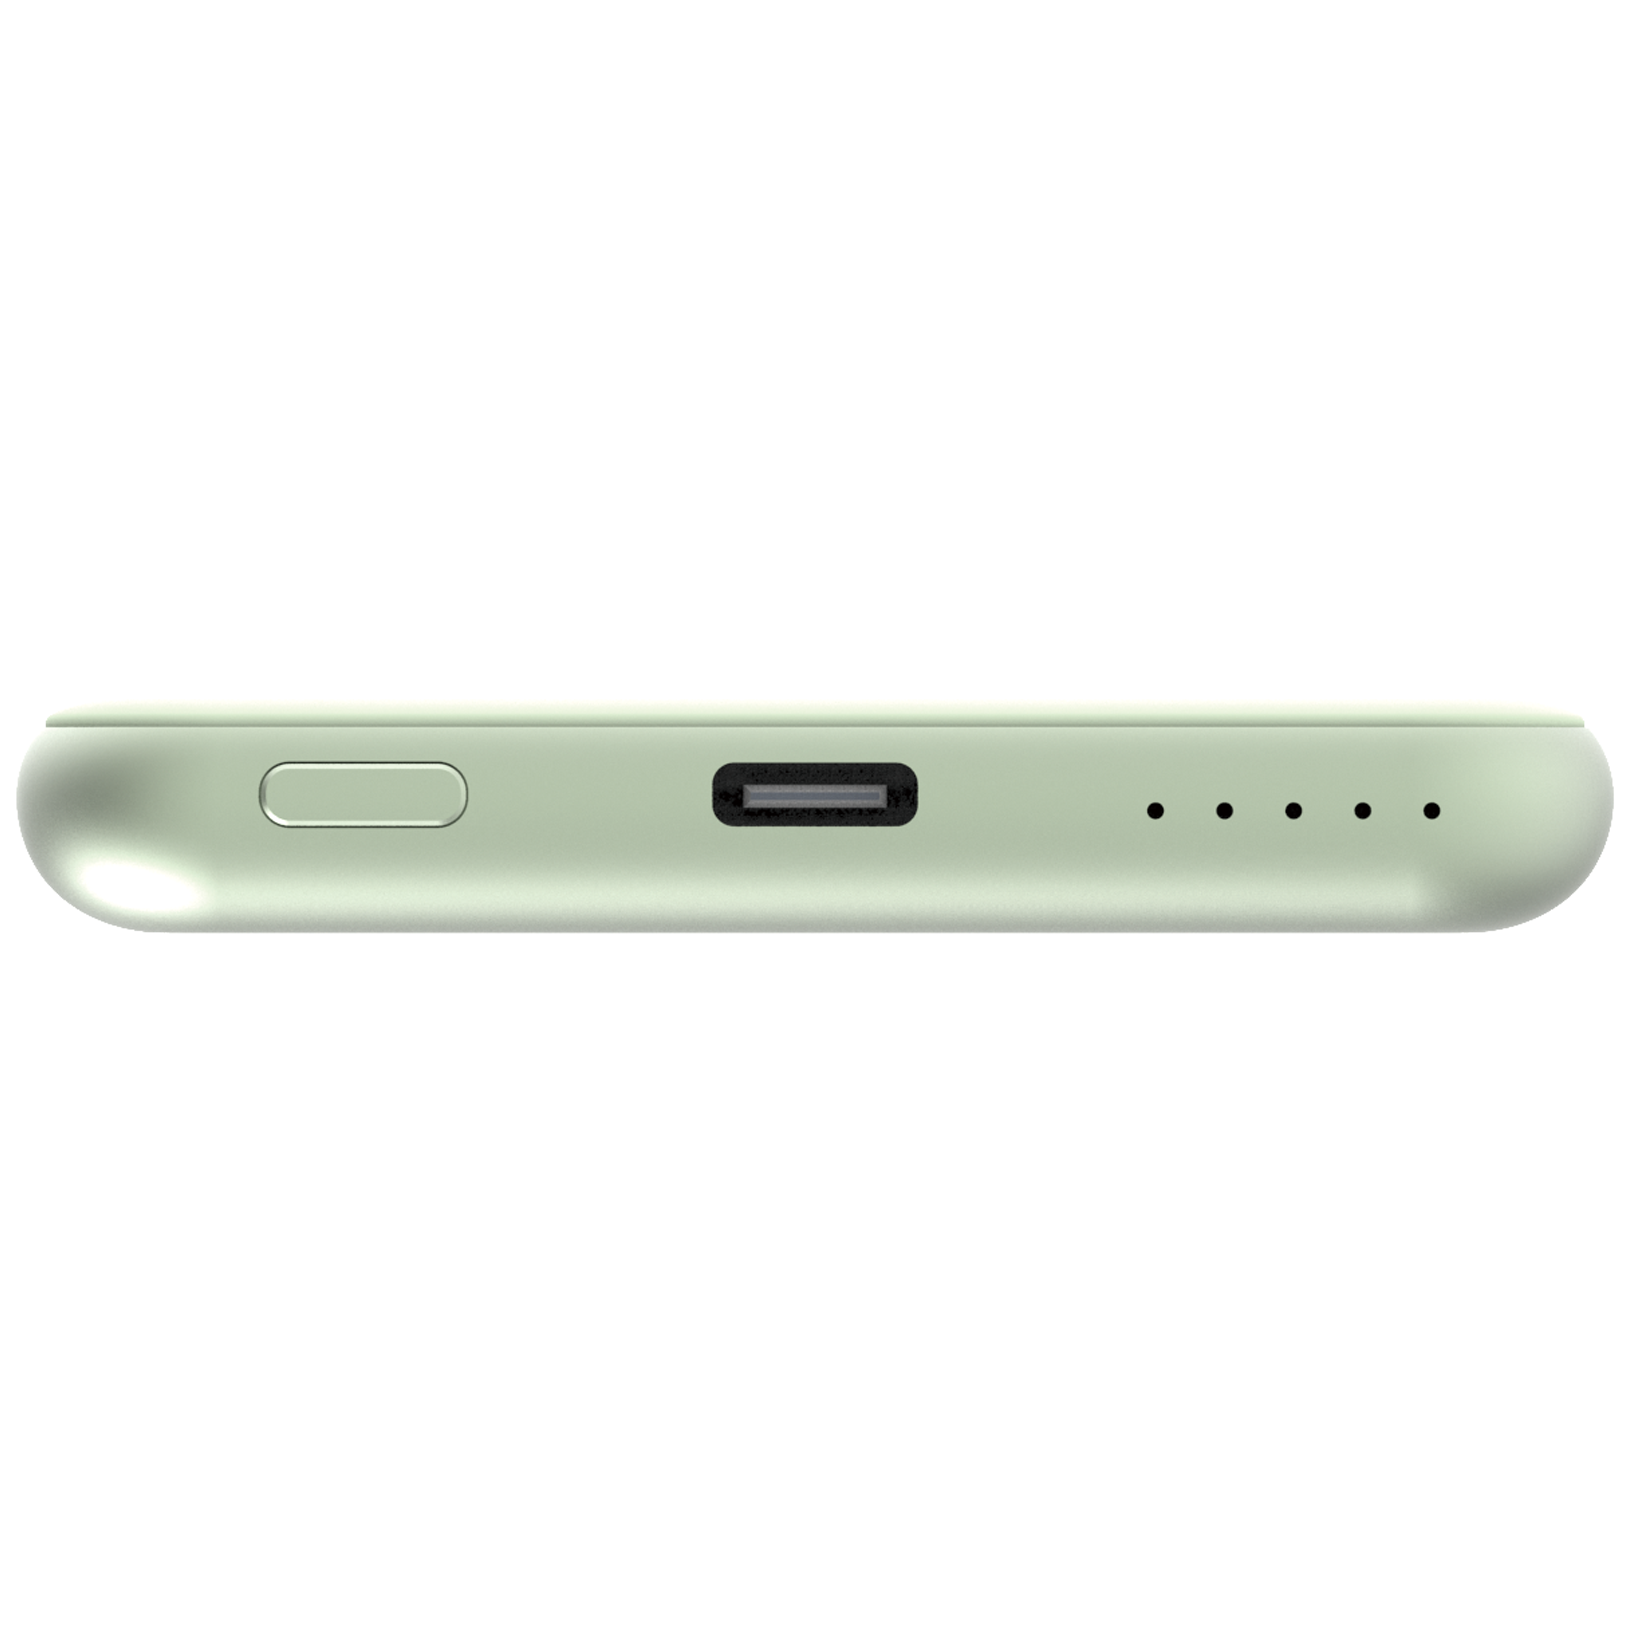 Charge 'n' Go Magnetic Wireless Power Bank 5000mAh Green